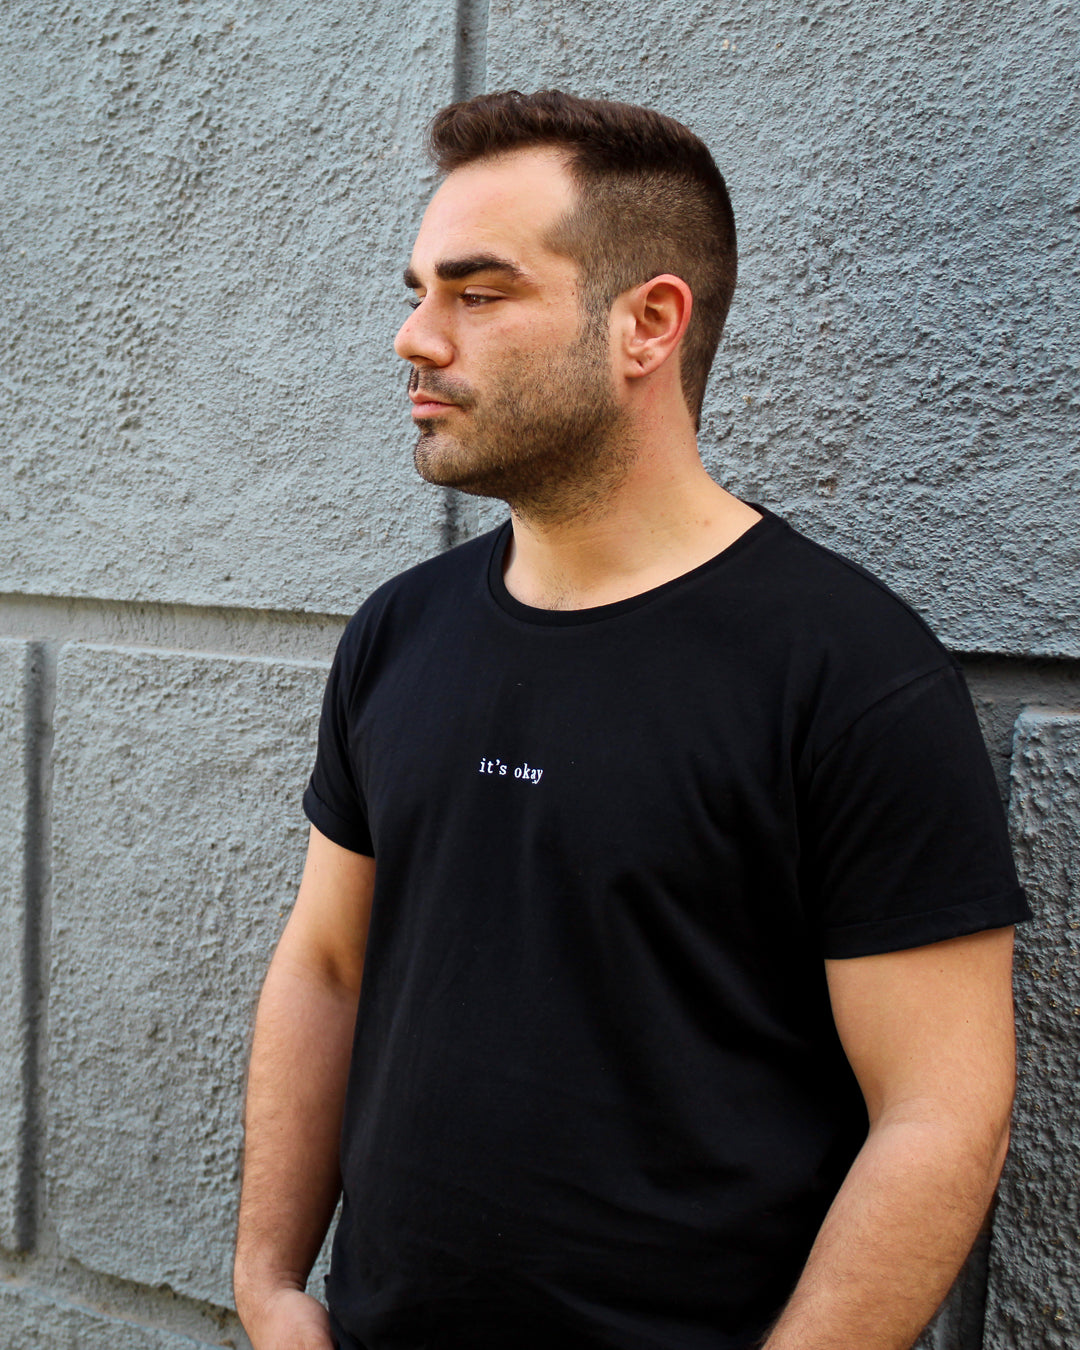 Organic t-shirt essential Black made in North of Portugal with love. Exclusive design made only for it's okay. T-shirt em algodão orgânico feito em portugal com amor | GOTS approved. Image: Guy standing up in a dark wall, wearing the essential black t-shirt made with organic cotton and love.